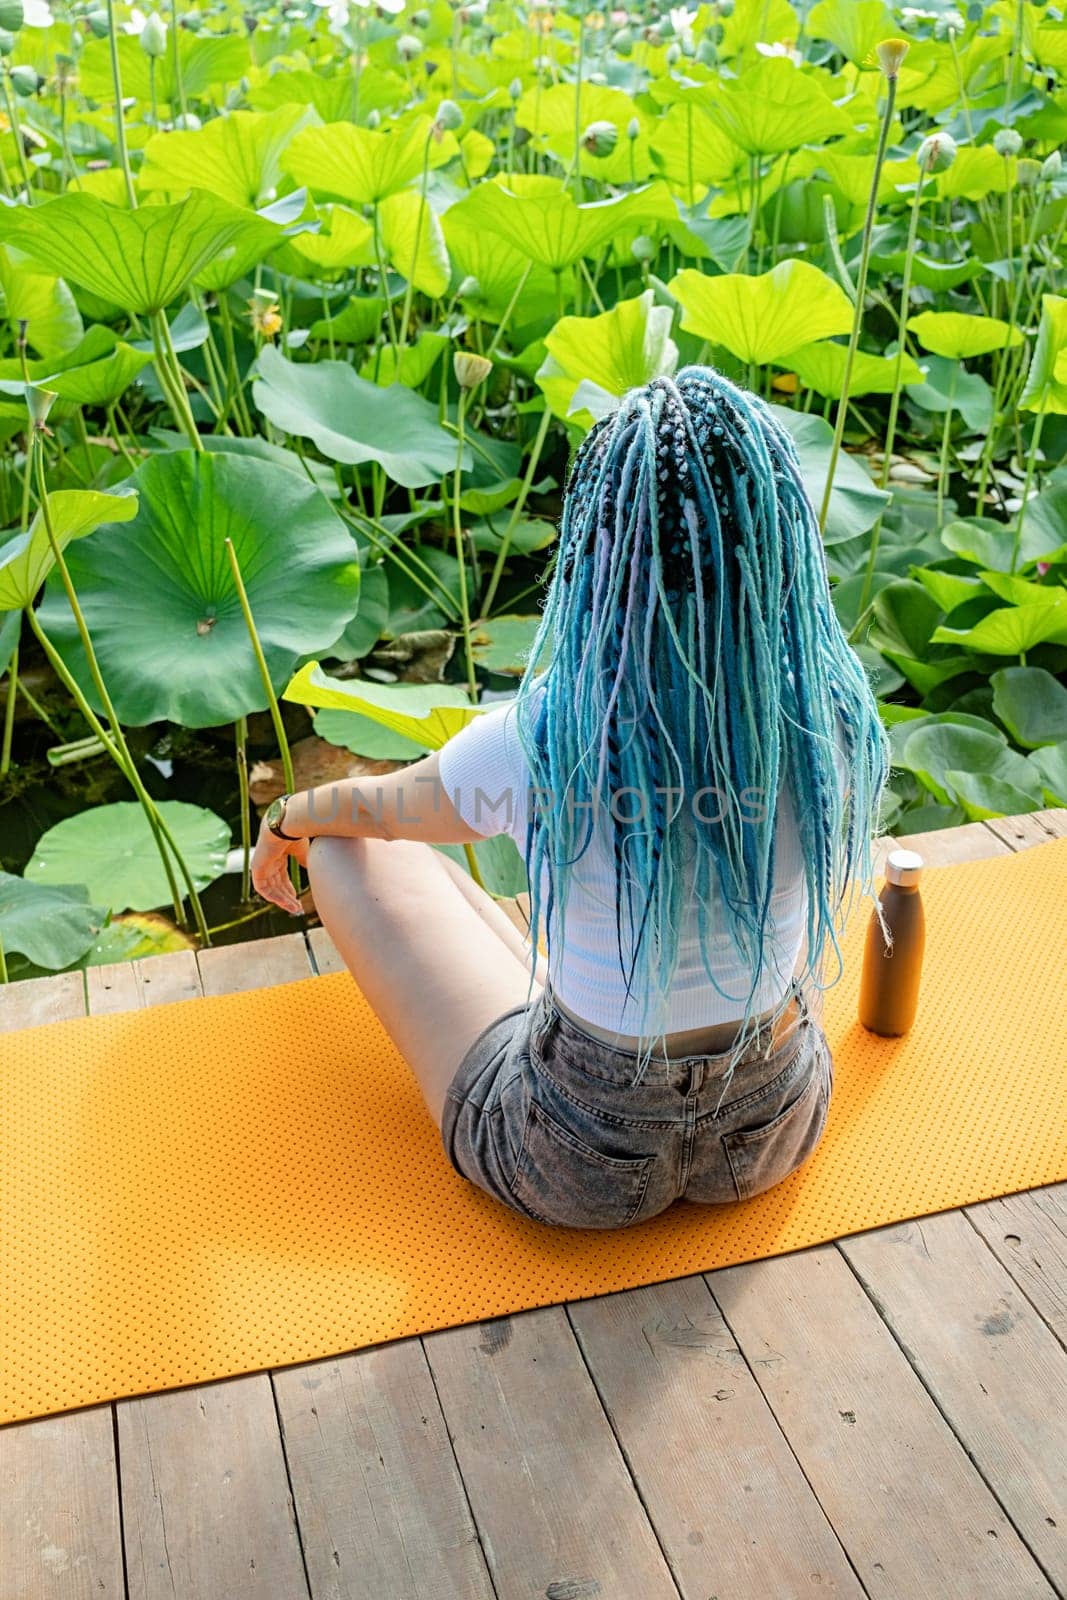 young beautiful woman with blue afro locks resting on yoga mat on wooden pierce on lotus lake enjoying nature, view from behind